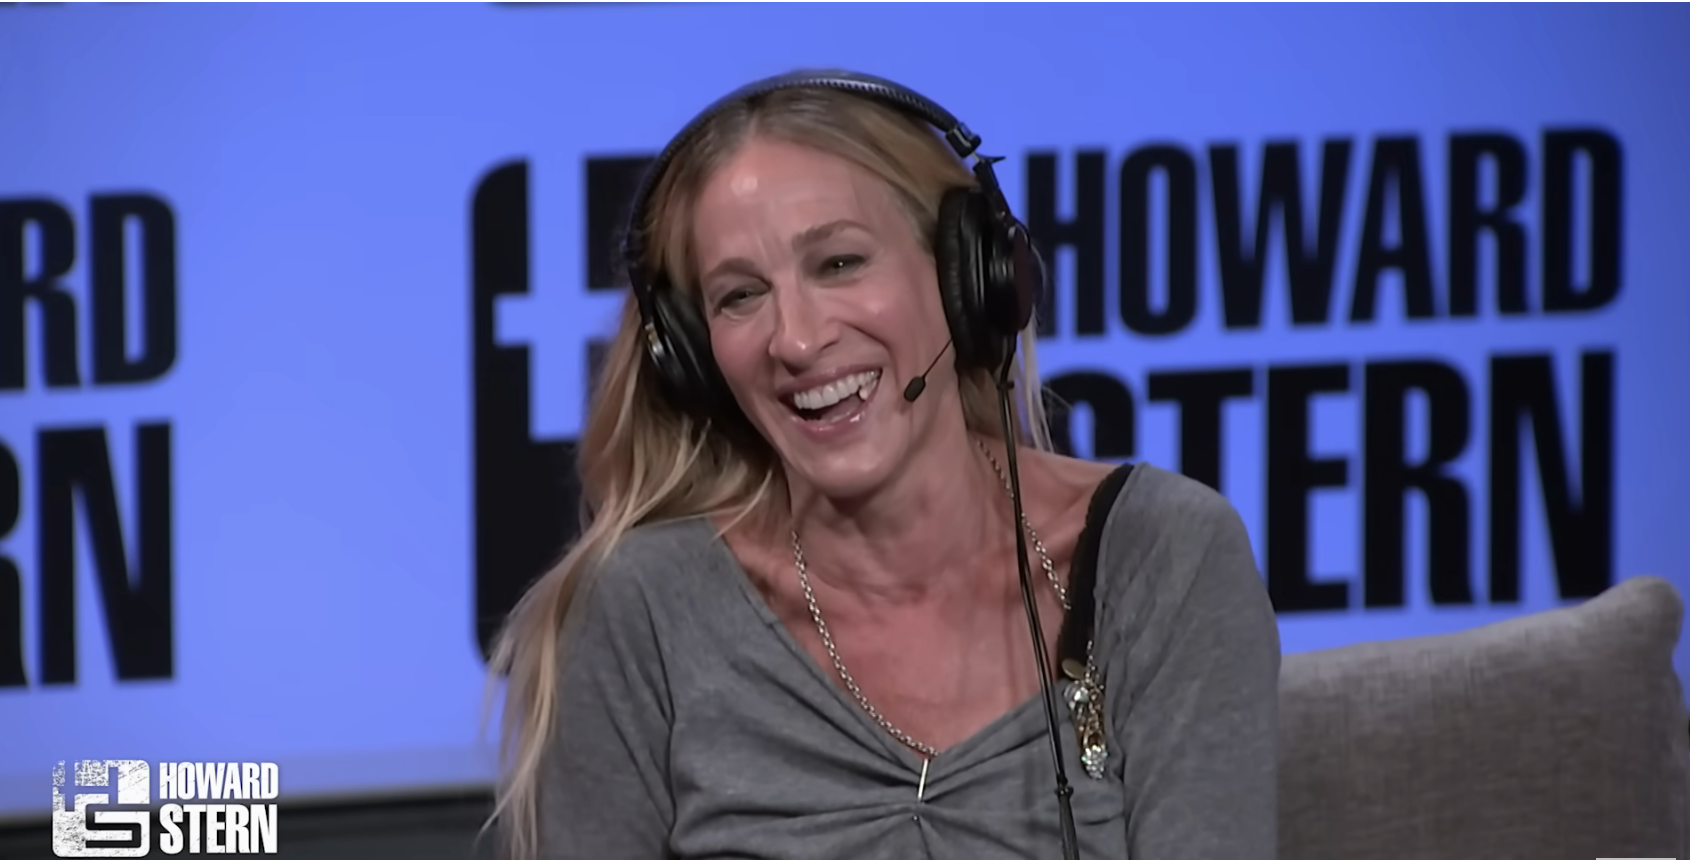 Close-up of SJP on the Howard Stern set smiling